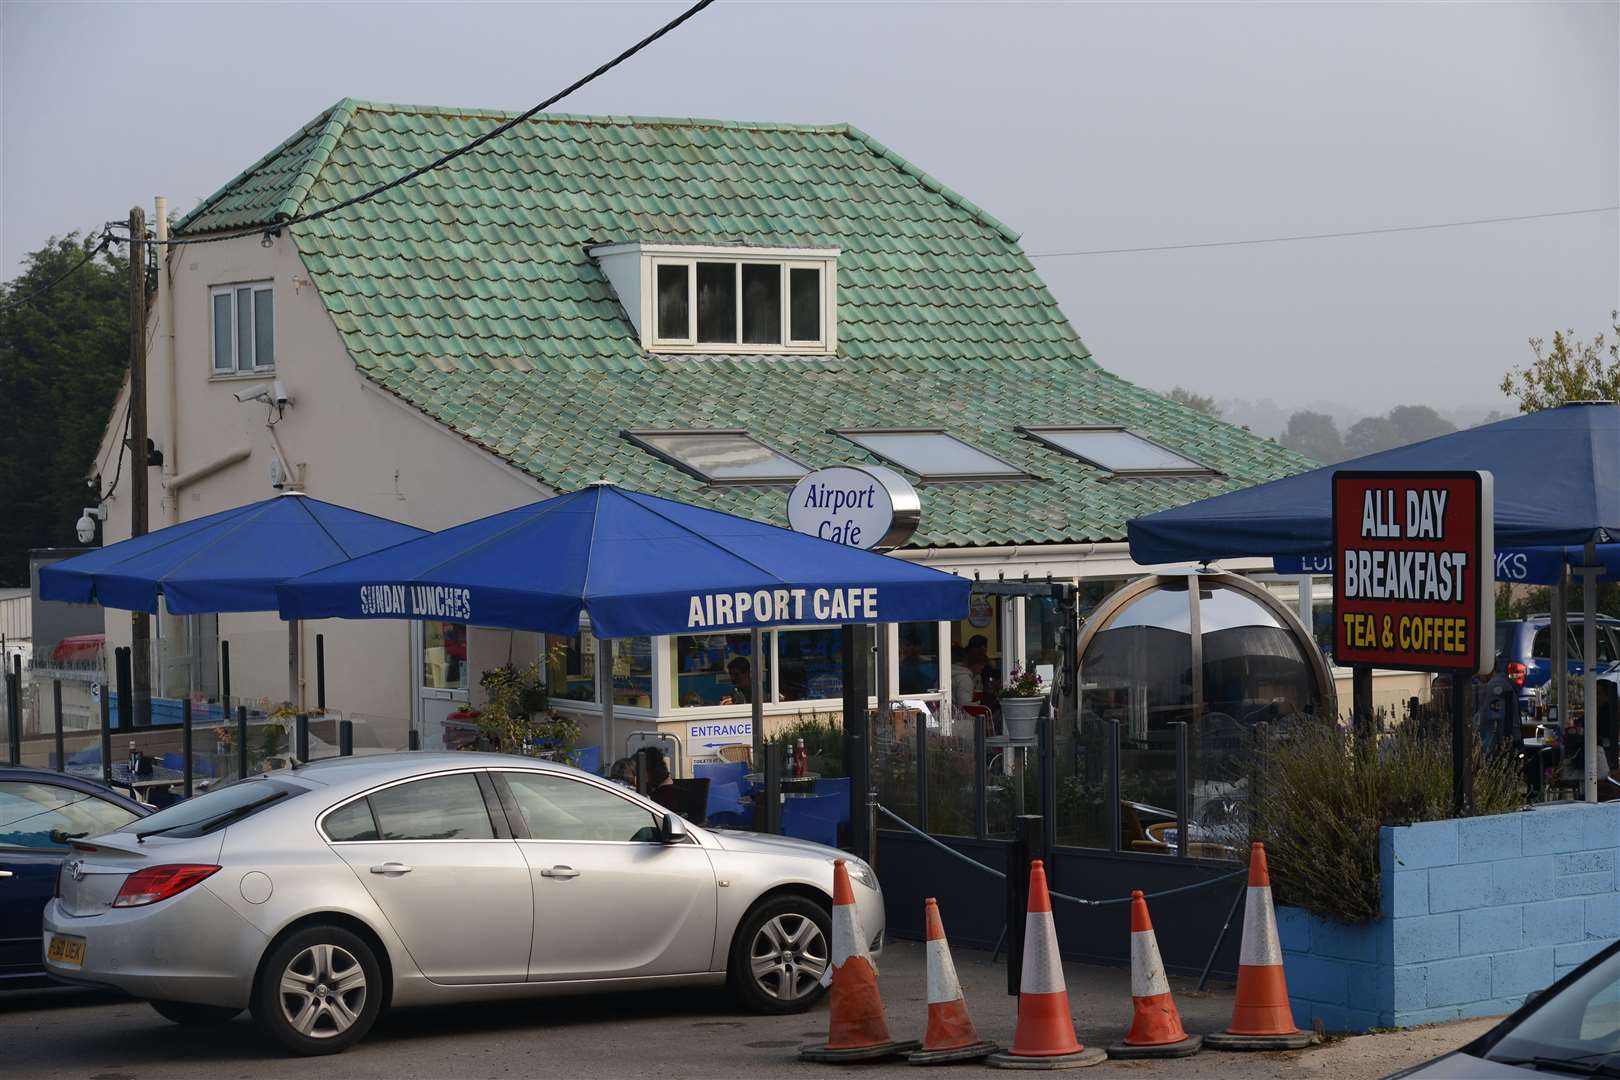 Airport Cafe in Main Road, Sellindge, proved very popular with social media users. Picture: Gary Browne